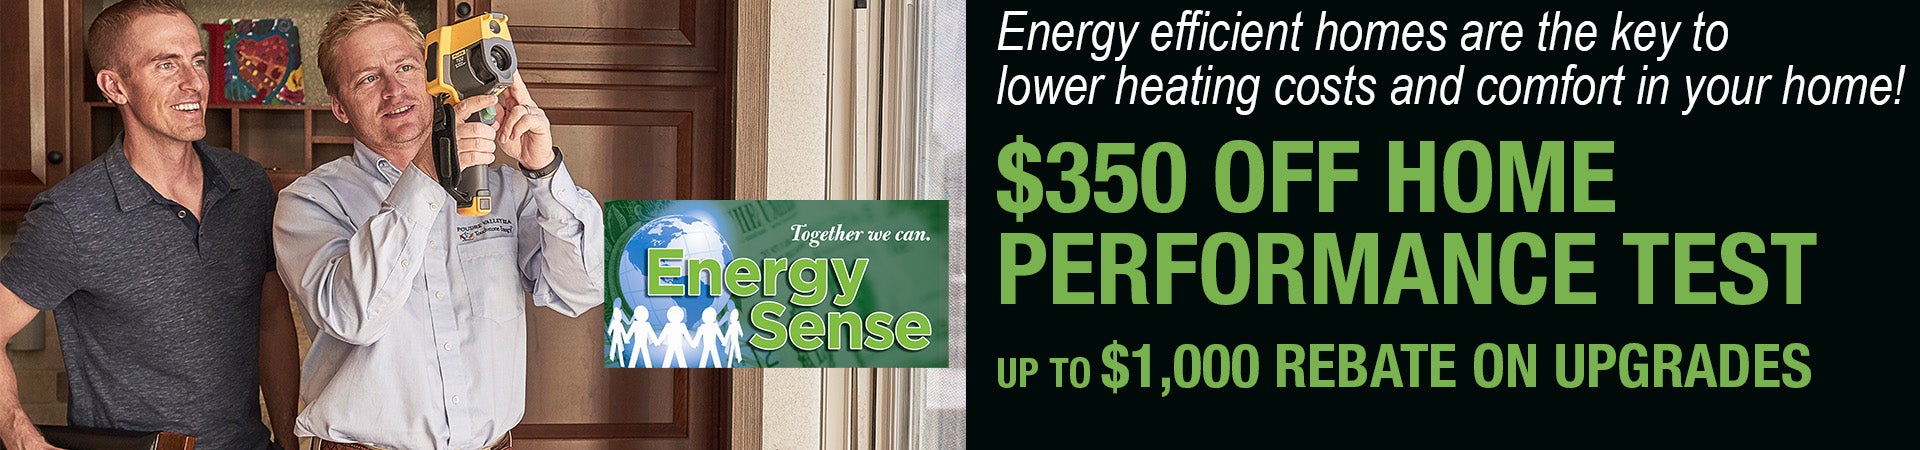 Lower heating bills and improve comfort with a home performance test